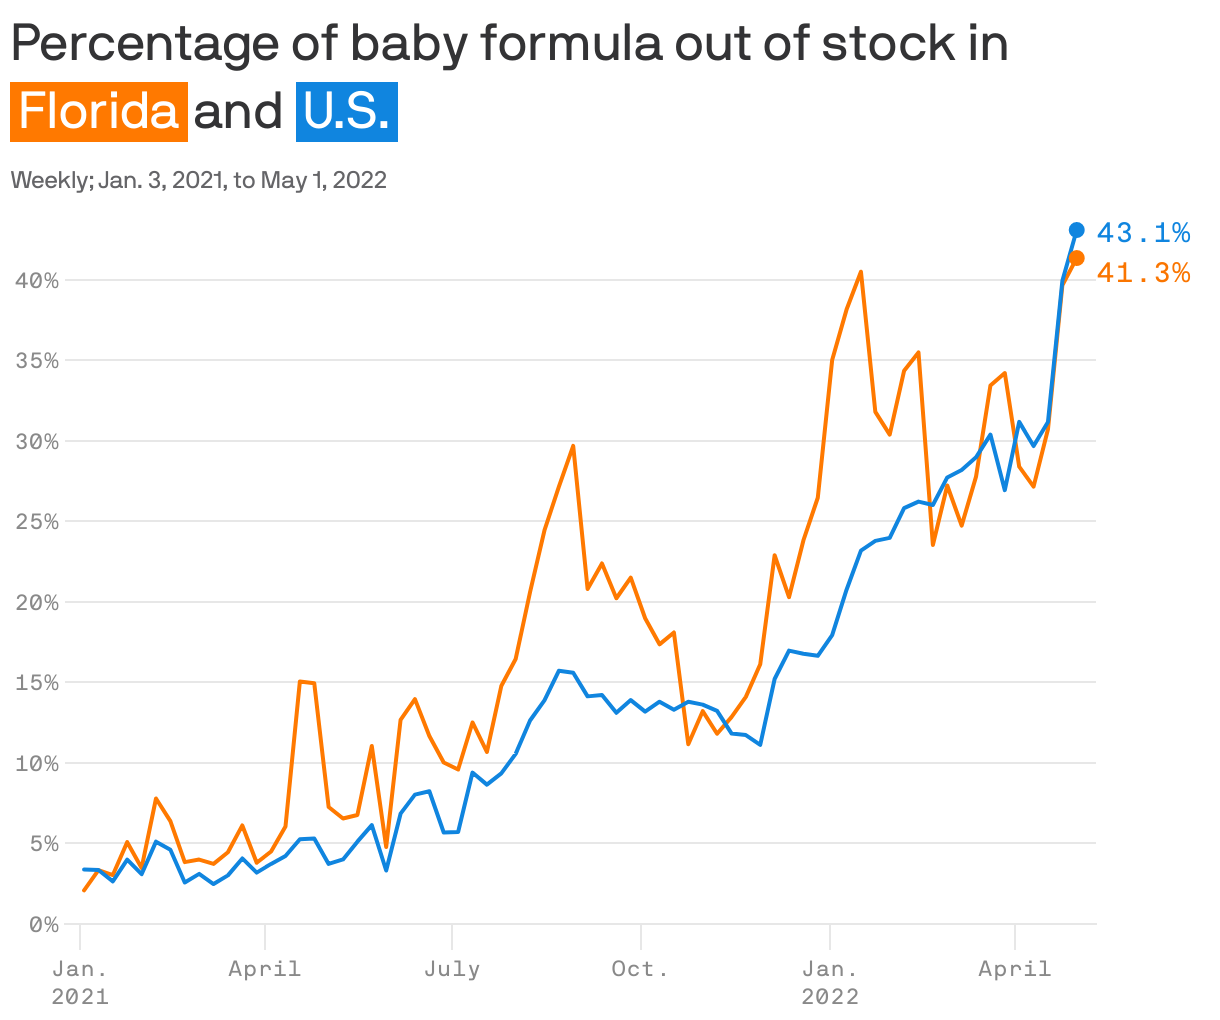 Percentage of baby formula out of stock in <span style="color: white; background-color:#ff7900; padding: 2px 4px; margin-right:3px; white-space: nowrap;">Florida</span>and <span style="color: white; background-color:#1085df; padding: 2px 4px; margin-right:3px; white-space: nowrap;">U.S.</span>